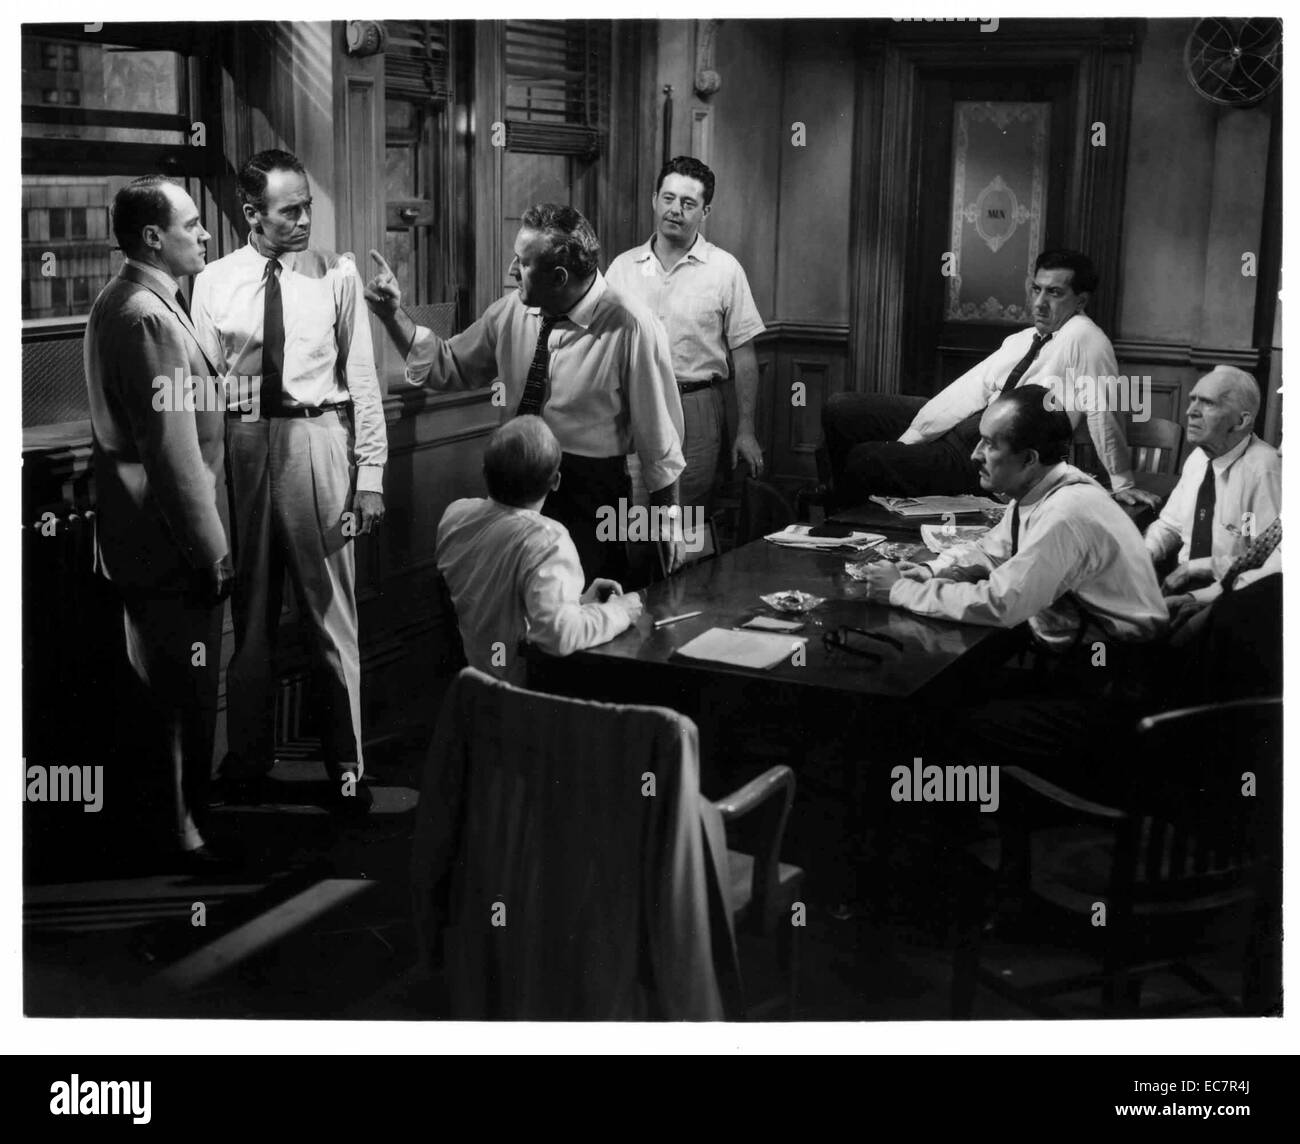 12 Angry Men is an American drama film from 1957. Written and produced by Reginald Rose and starring Henry Fonda. It tells the story of twelve members of a jury debating a defendant's guilt. Selected for the United States' National Film Registry by the Library of Congress. Stock Photo